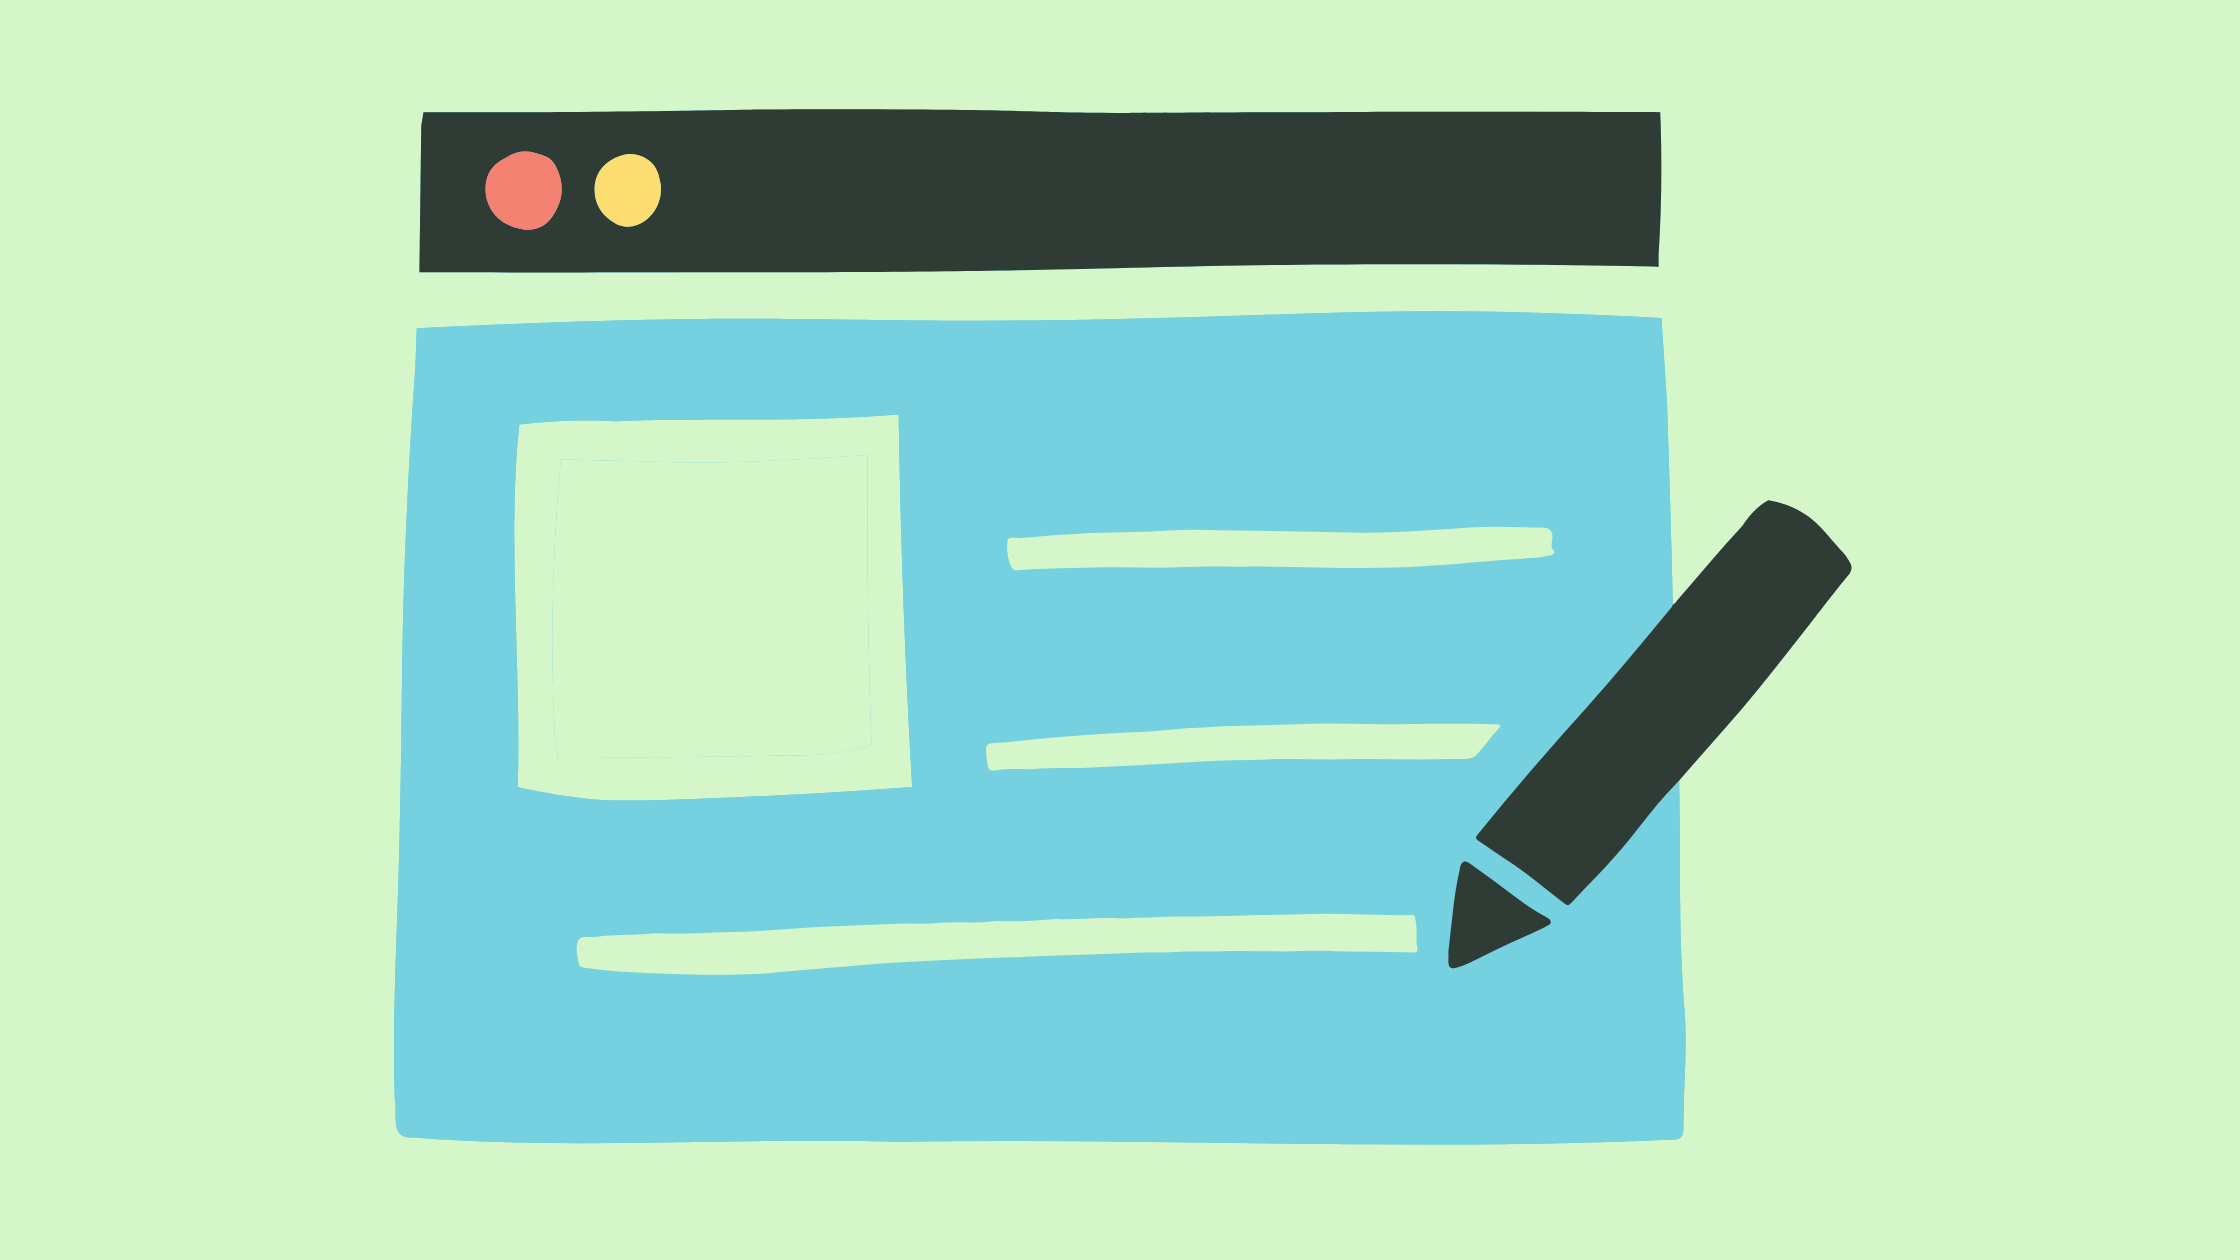 A graphic of a blog layout with a pencil icon next to it